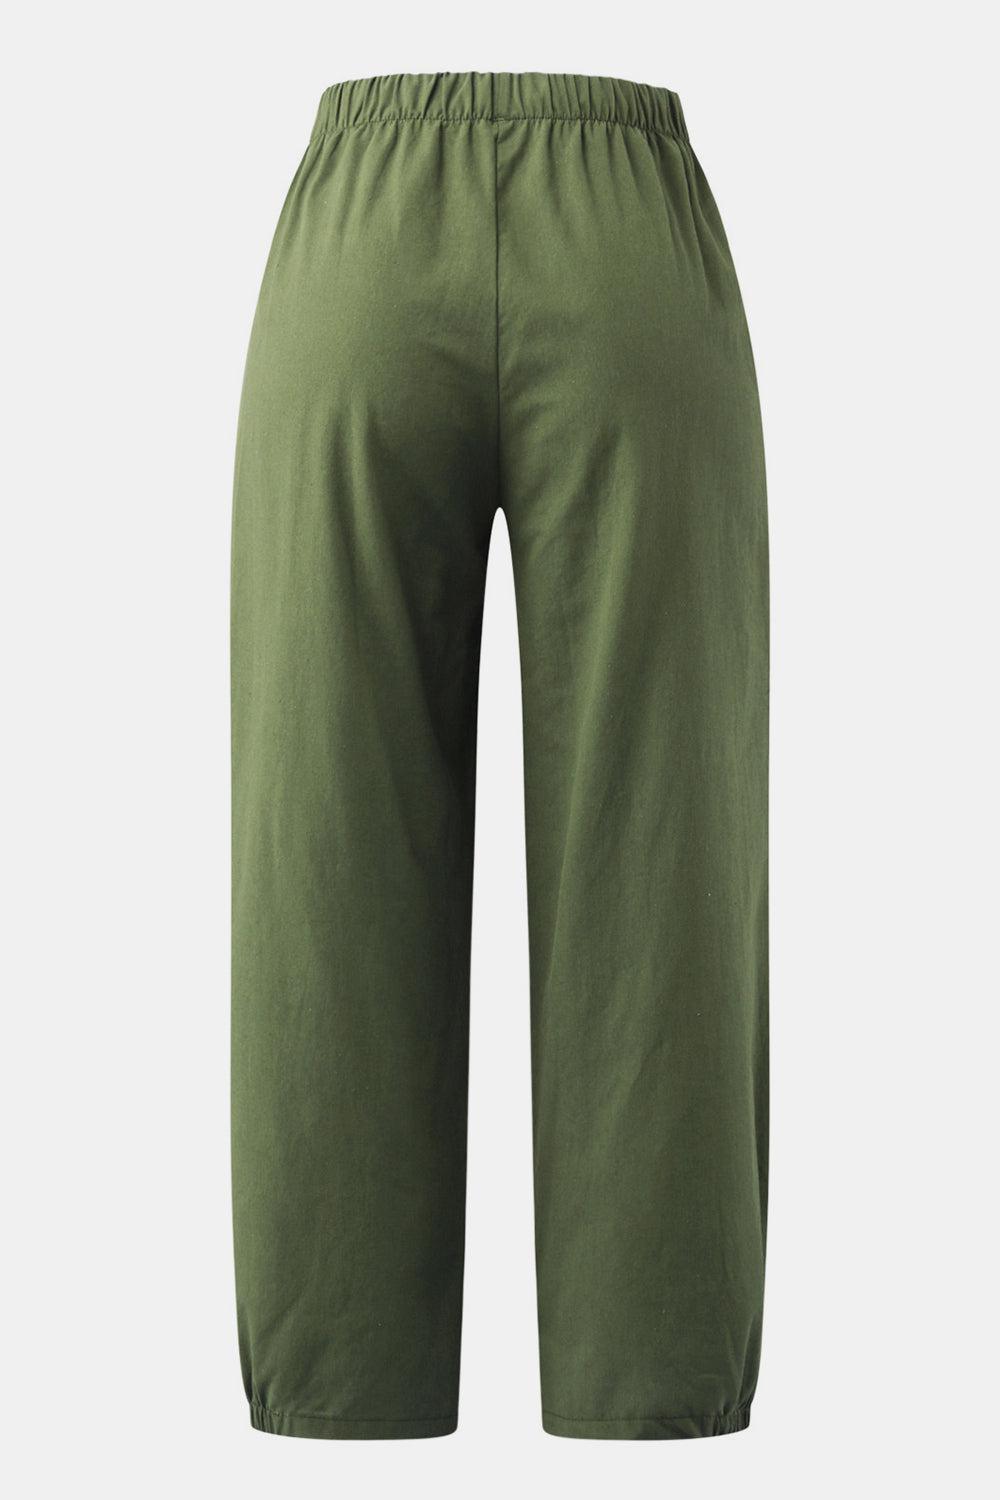 a close up of a person wearing green pants